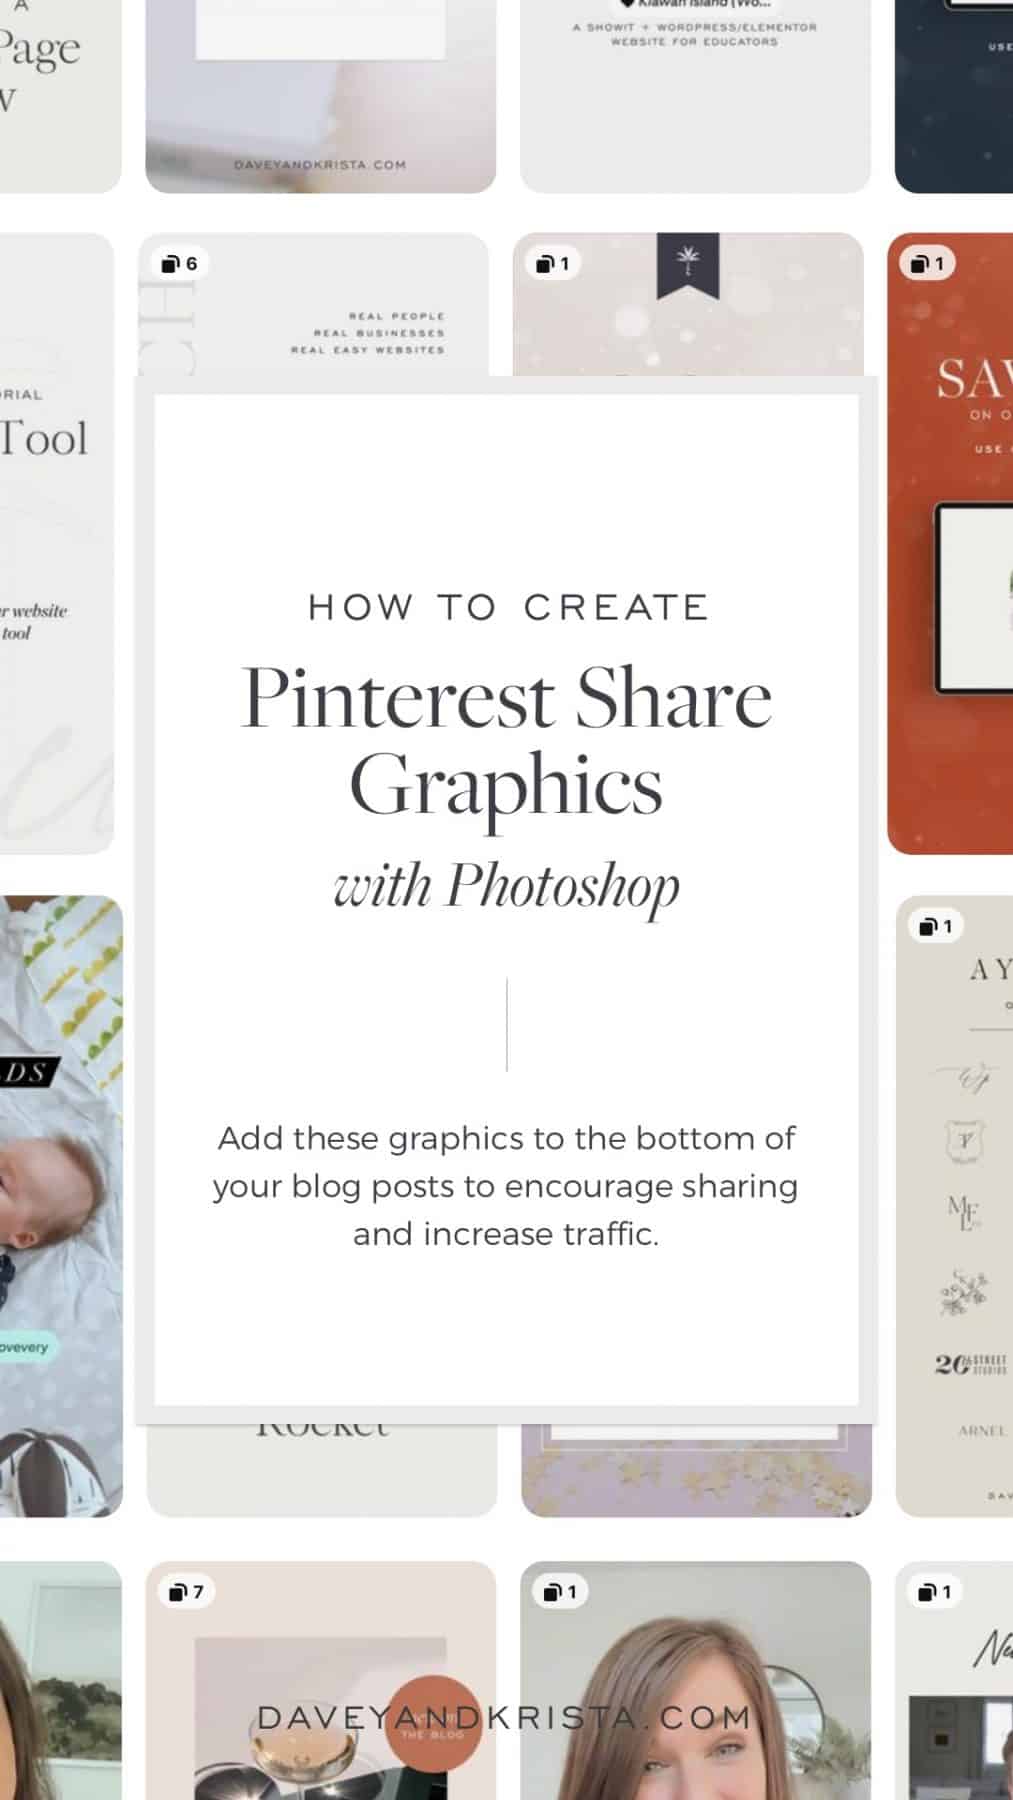 Learn how to create Pinterest share graphics with Adobe Photoshop | Davey & Krista 